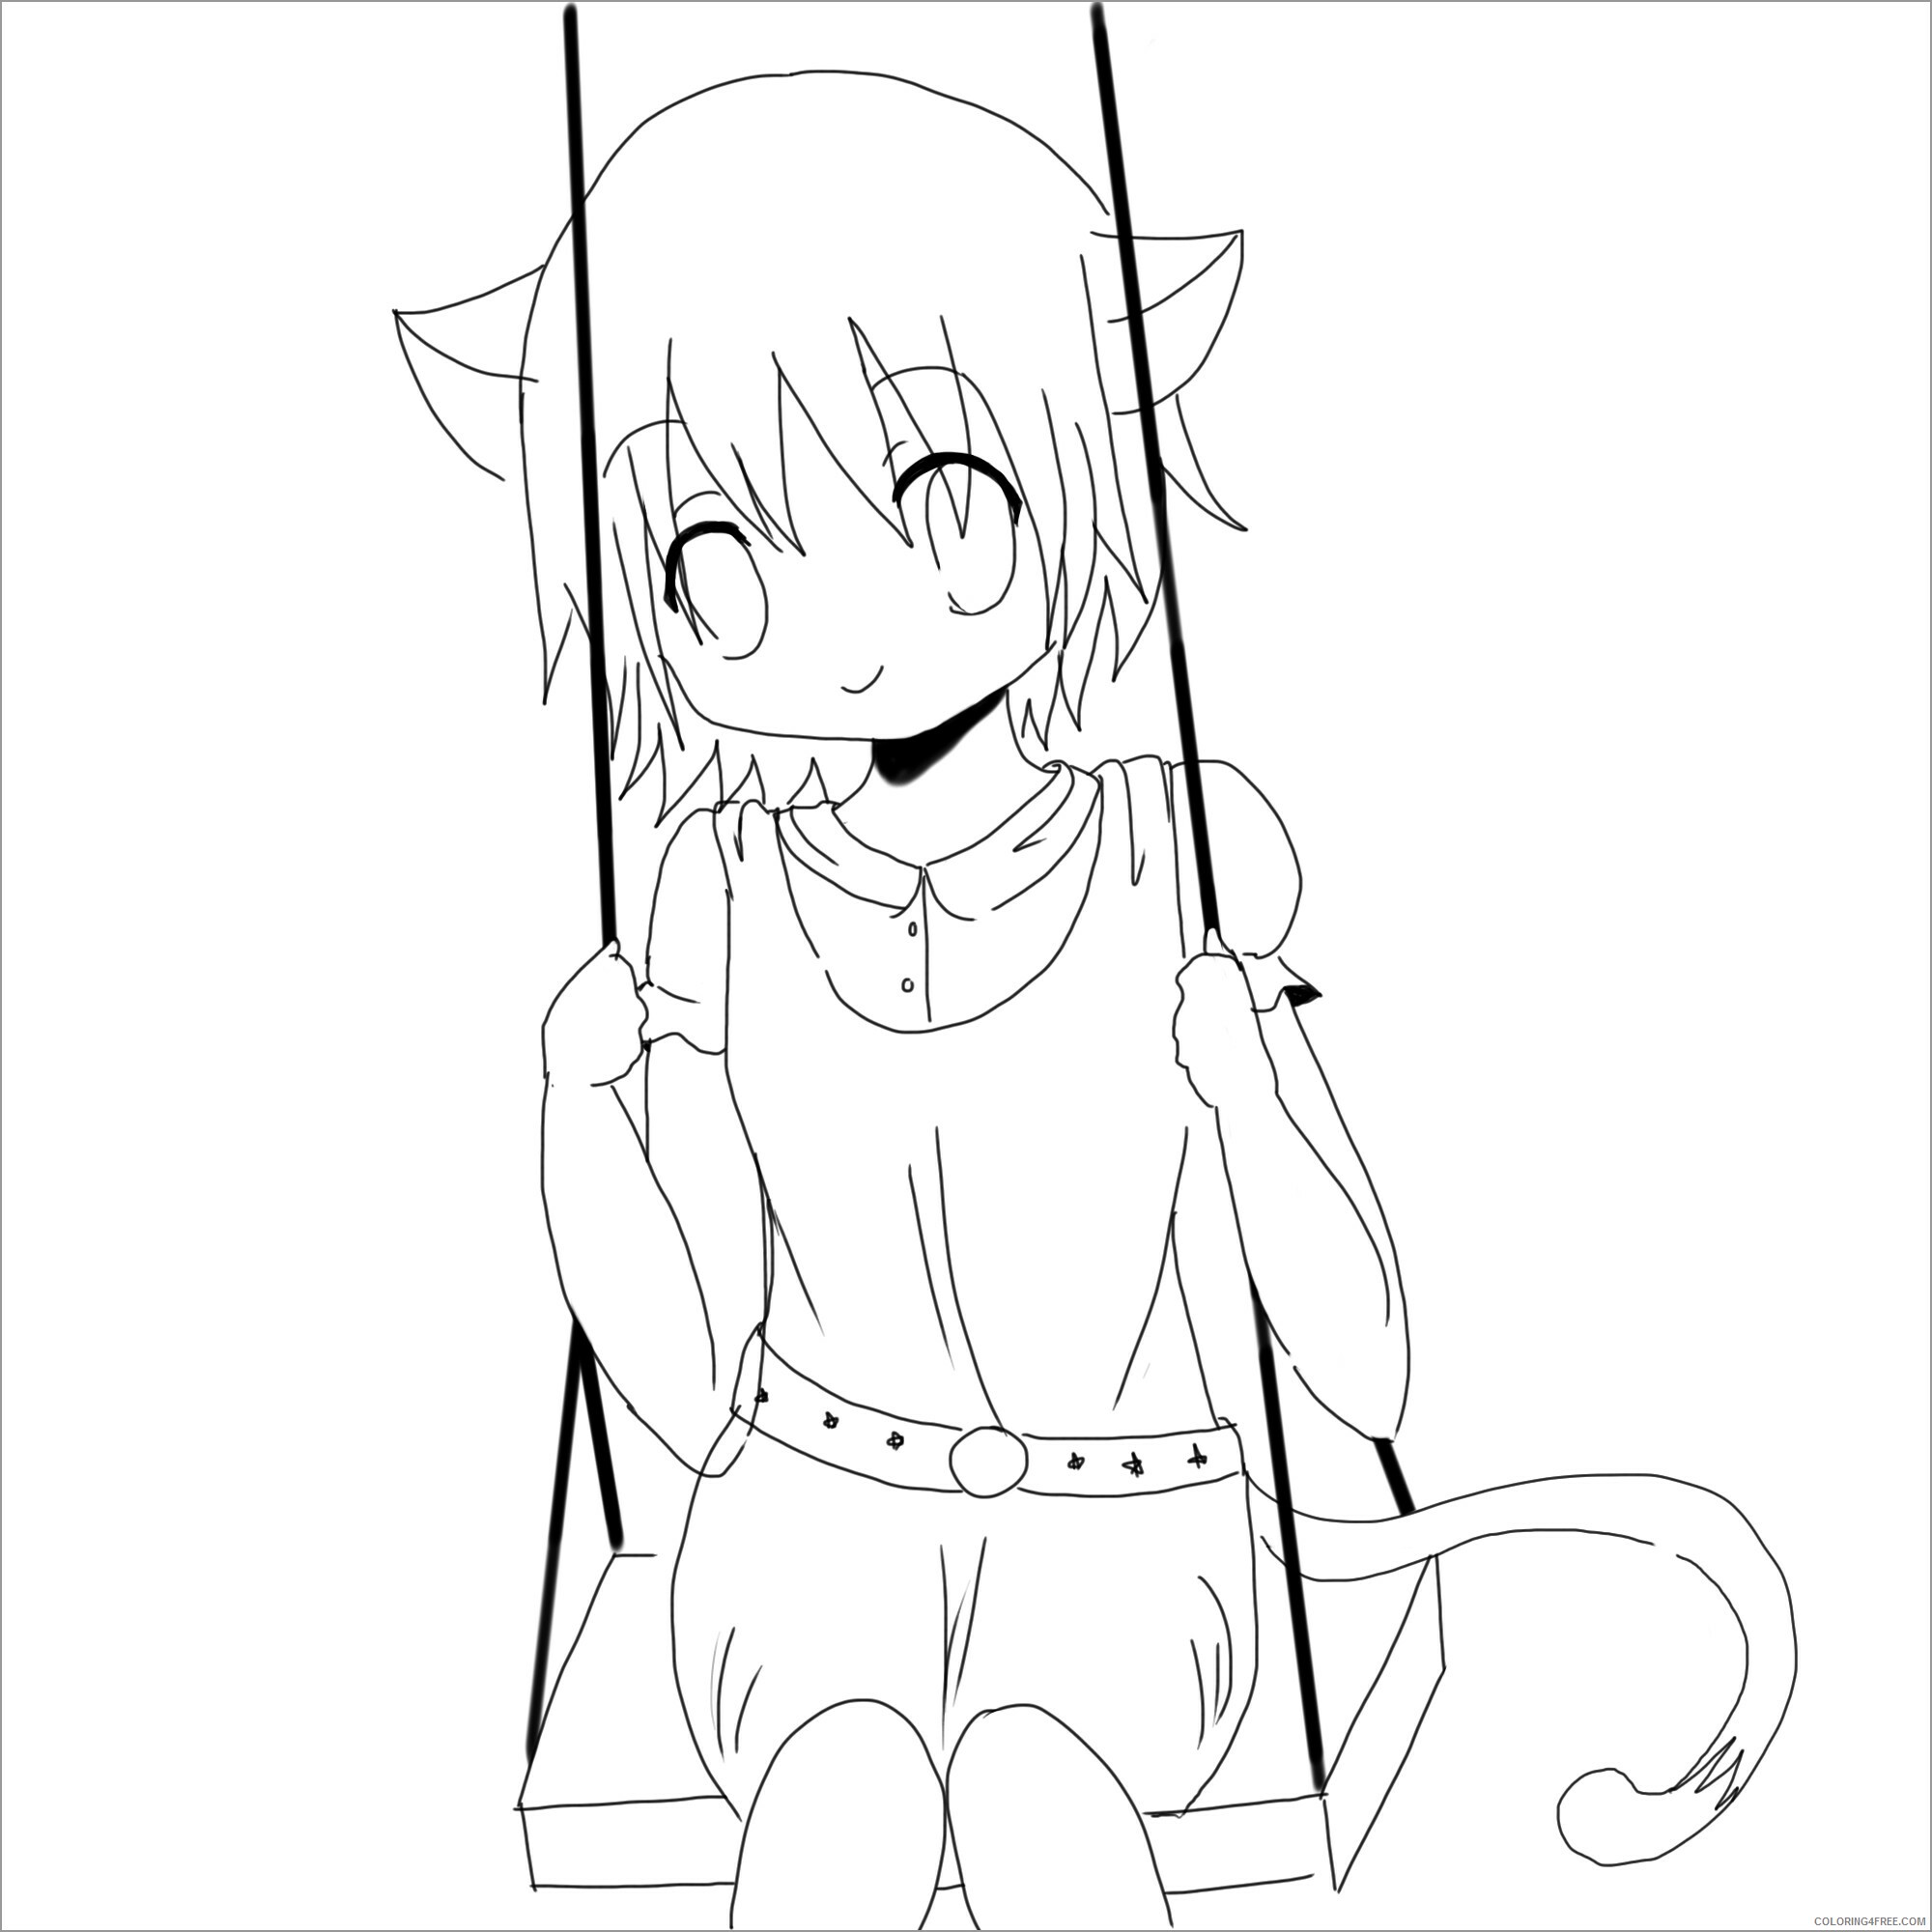 Cat Coloring Pages Animal Printable Sheets Cute Anime Cat Girl 2021 0868 Coloring4free Coloring4free Com